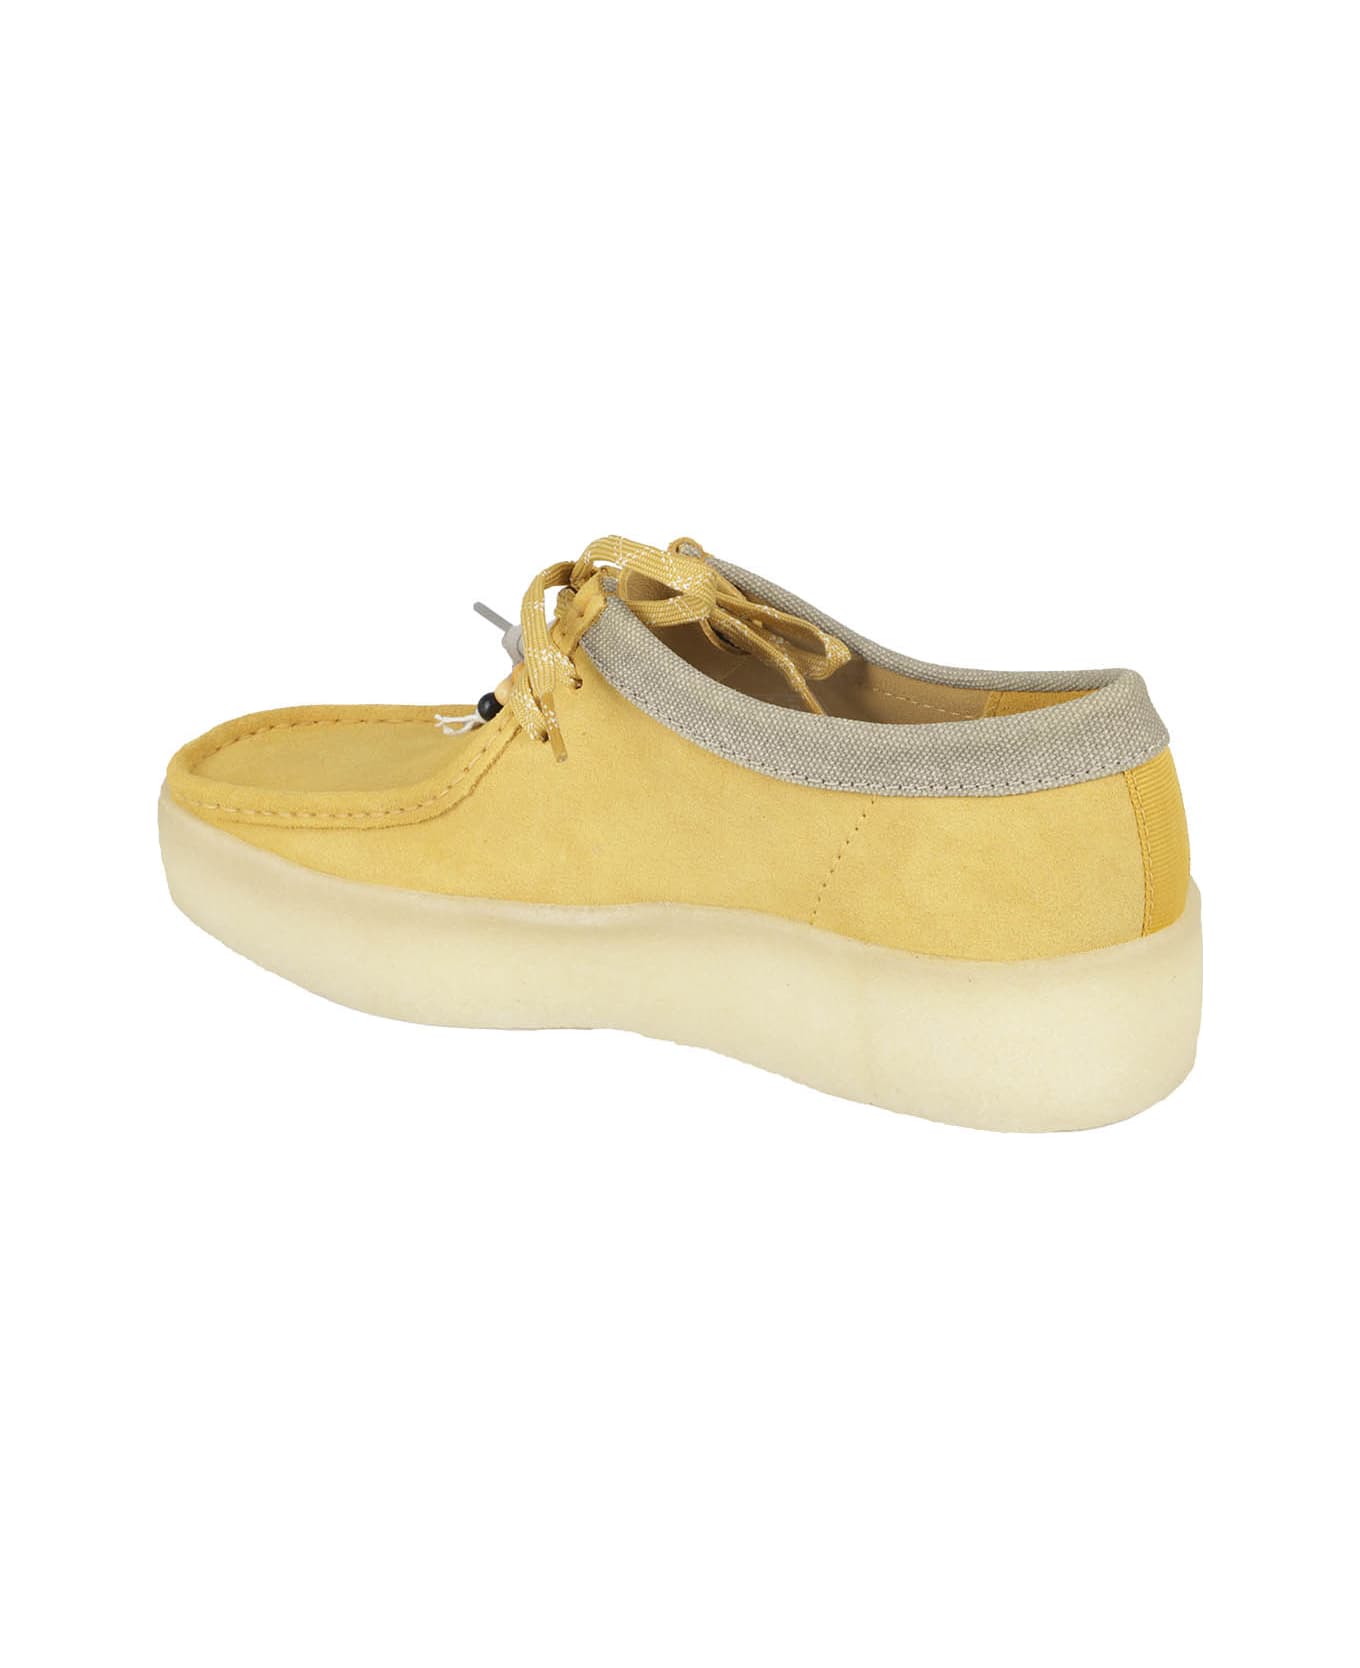 Clarks Wallabee - Amber Gold